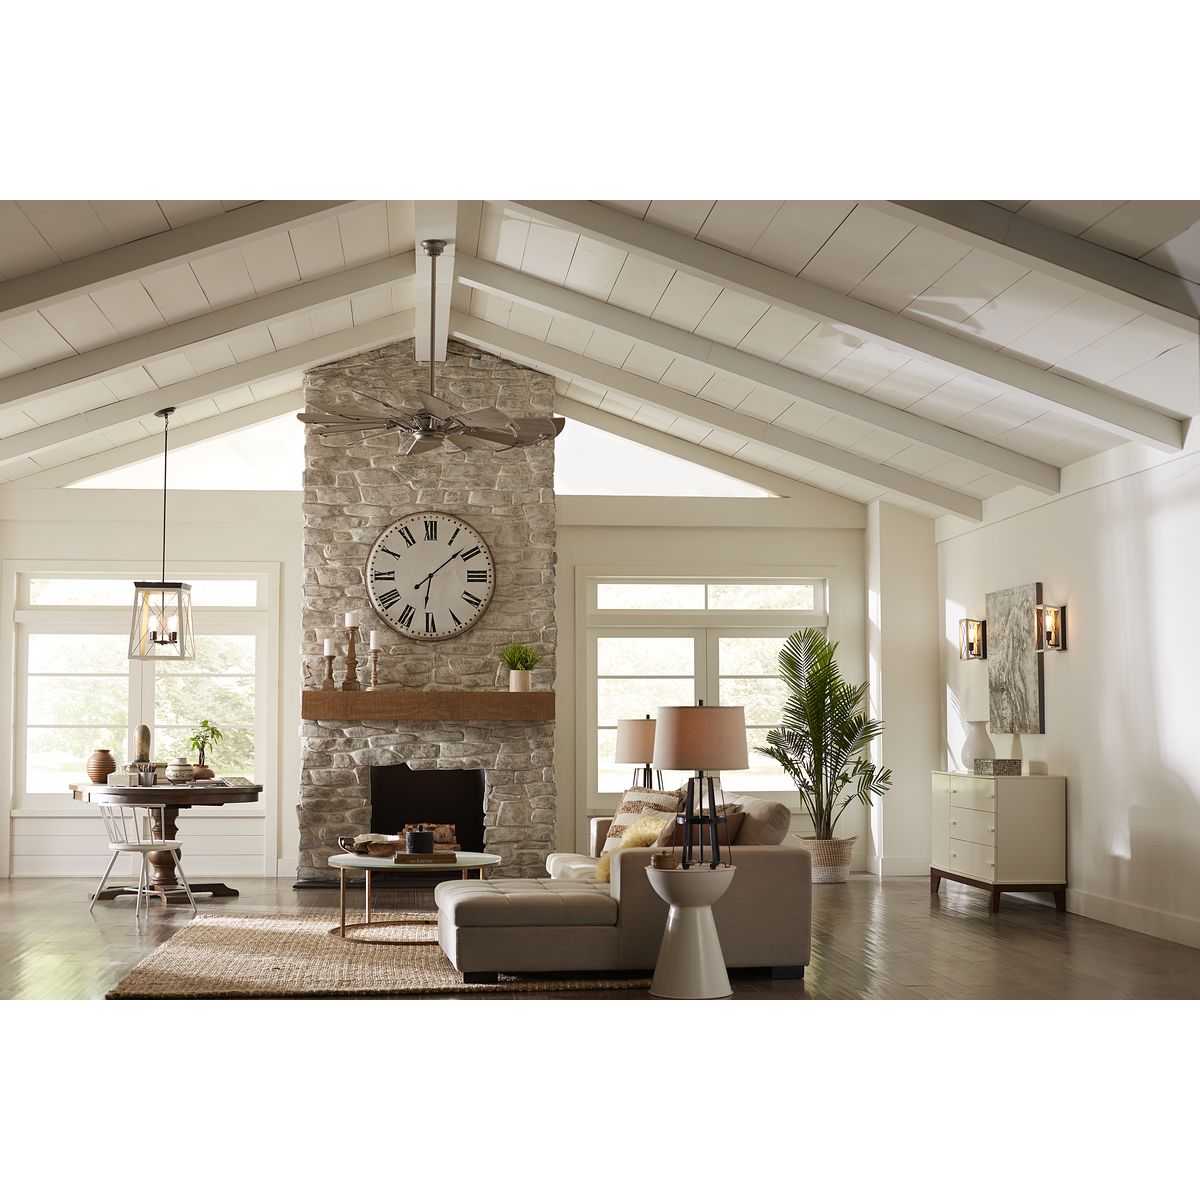 Progress Lighting Briarwood Collection One-light Wall Sconce P710012 for sale online 